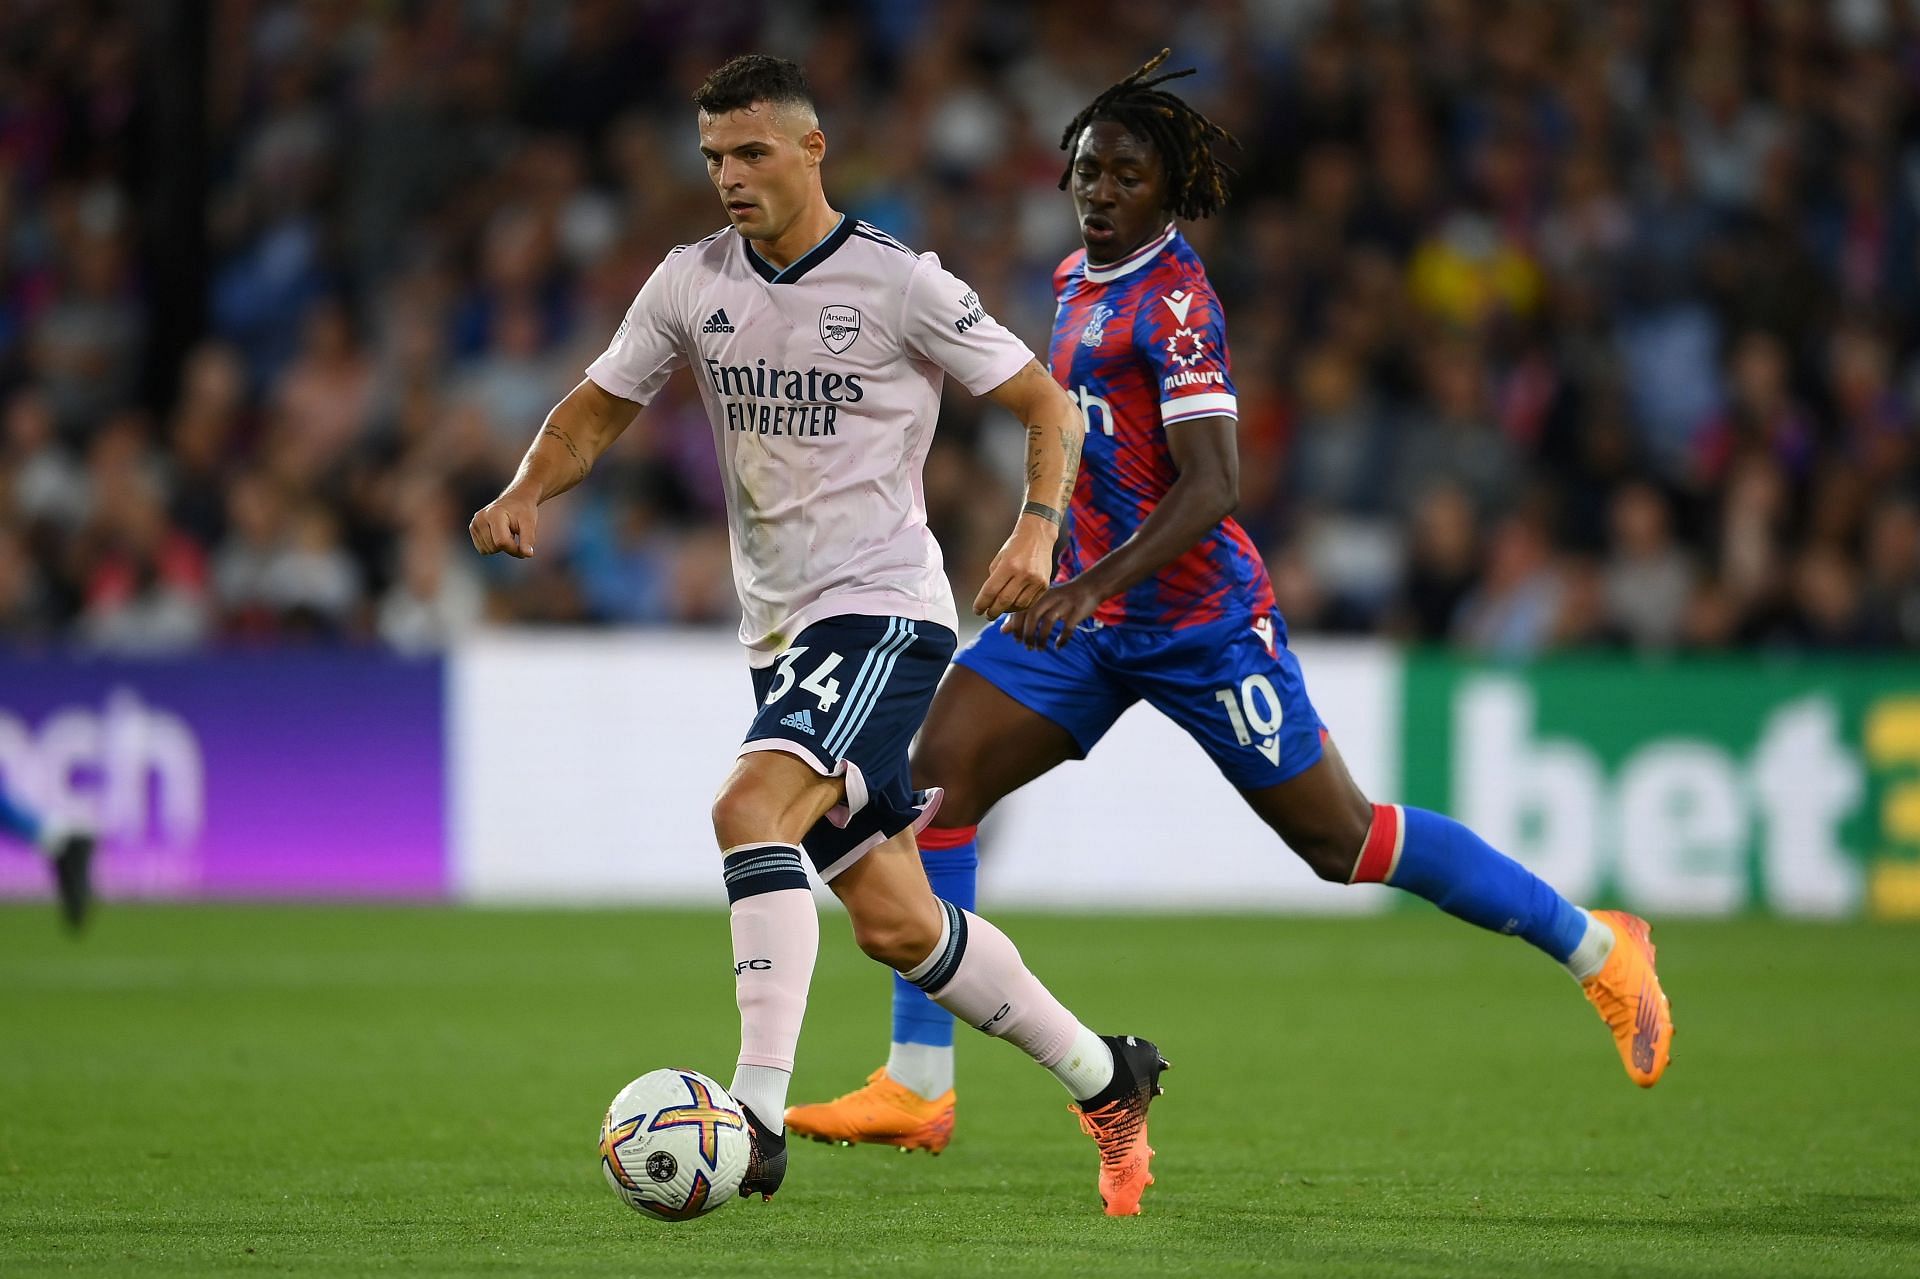 Xhaka in action for Arsenal against Crystal Palace last weekend.